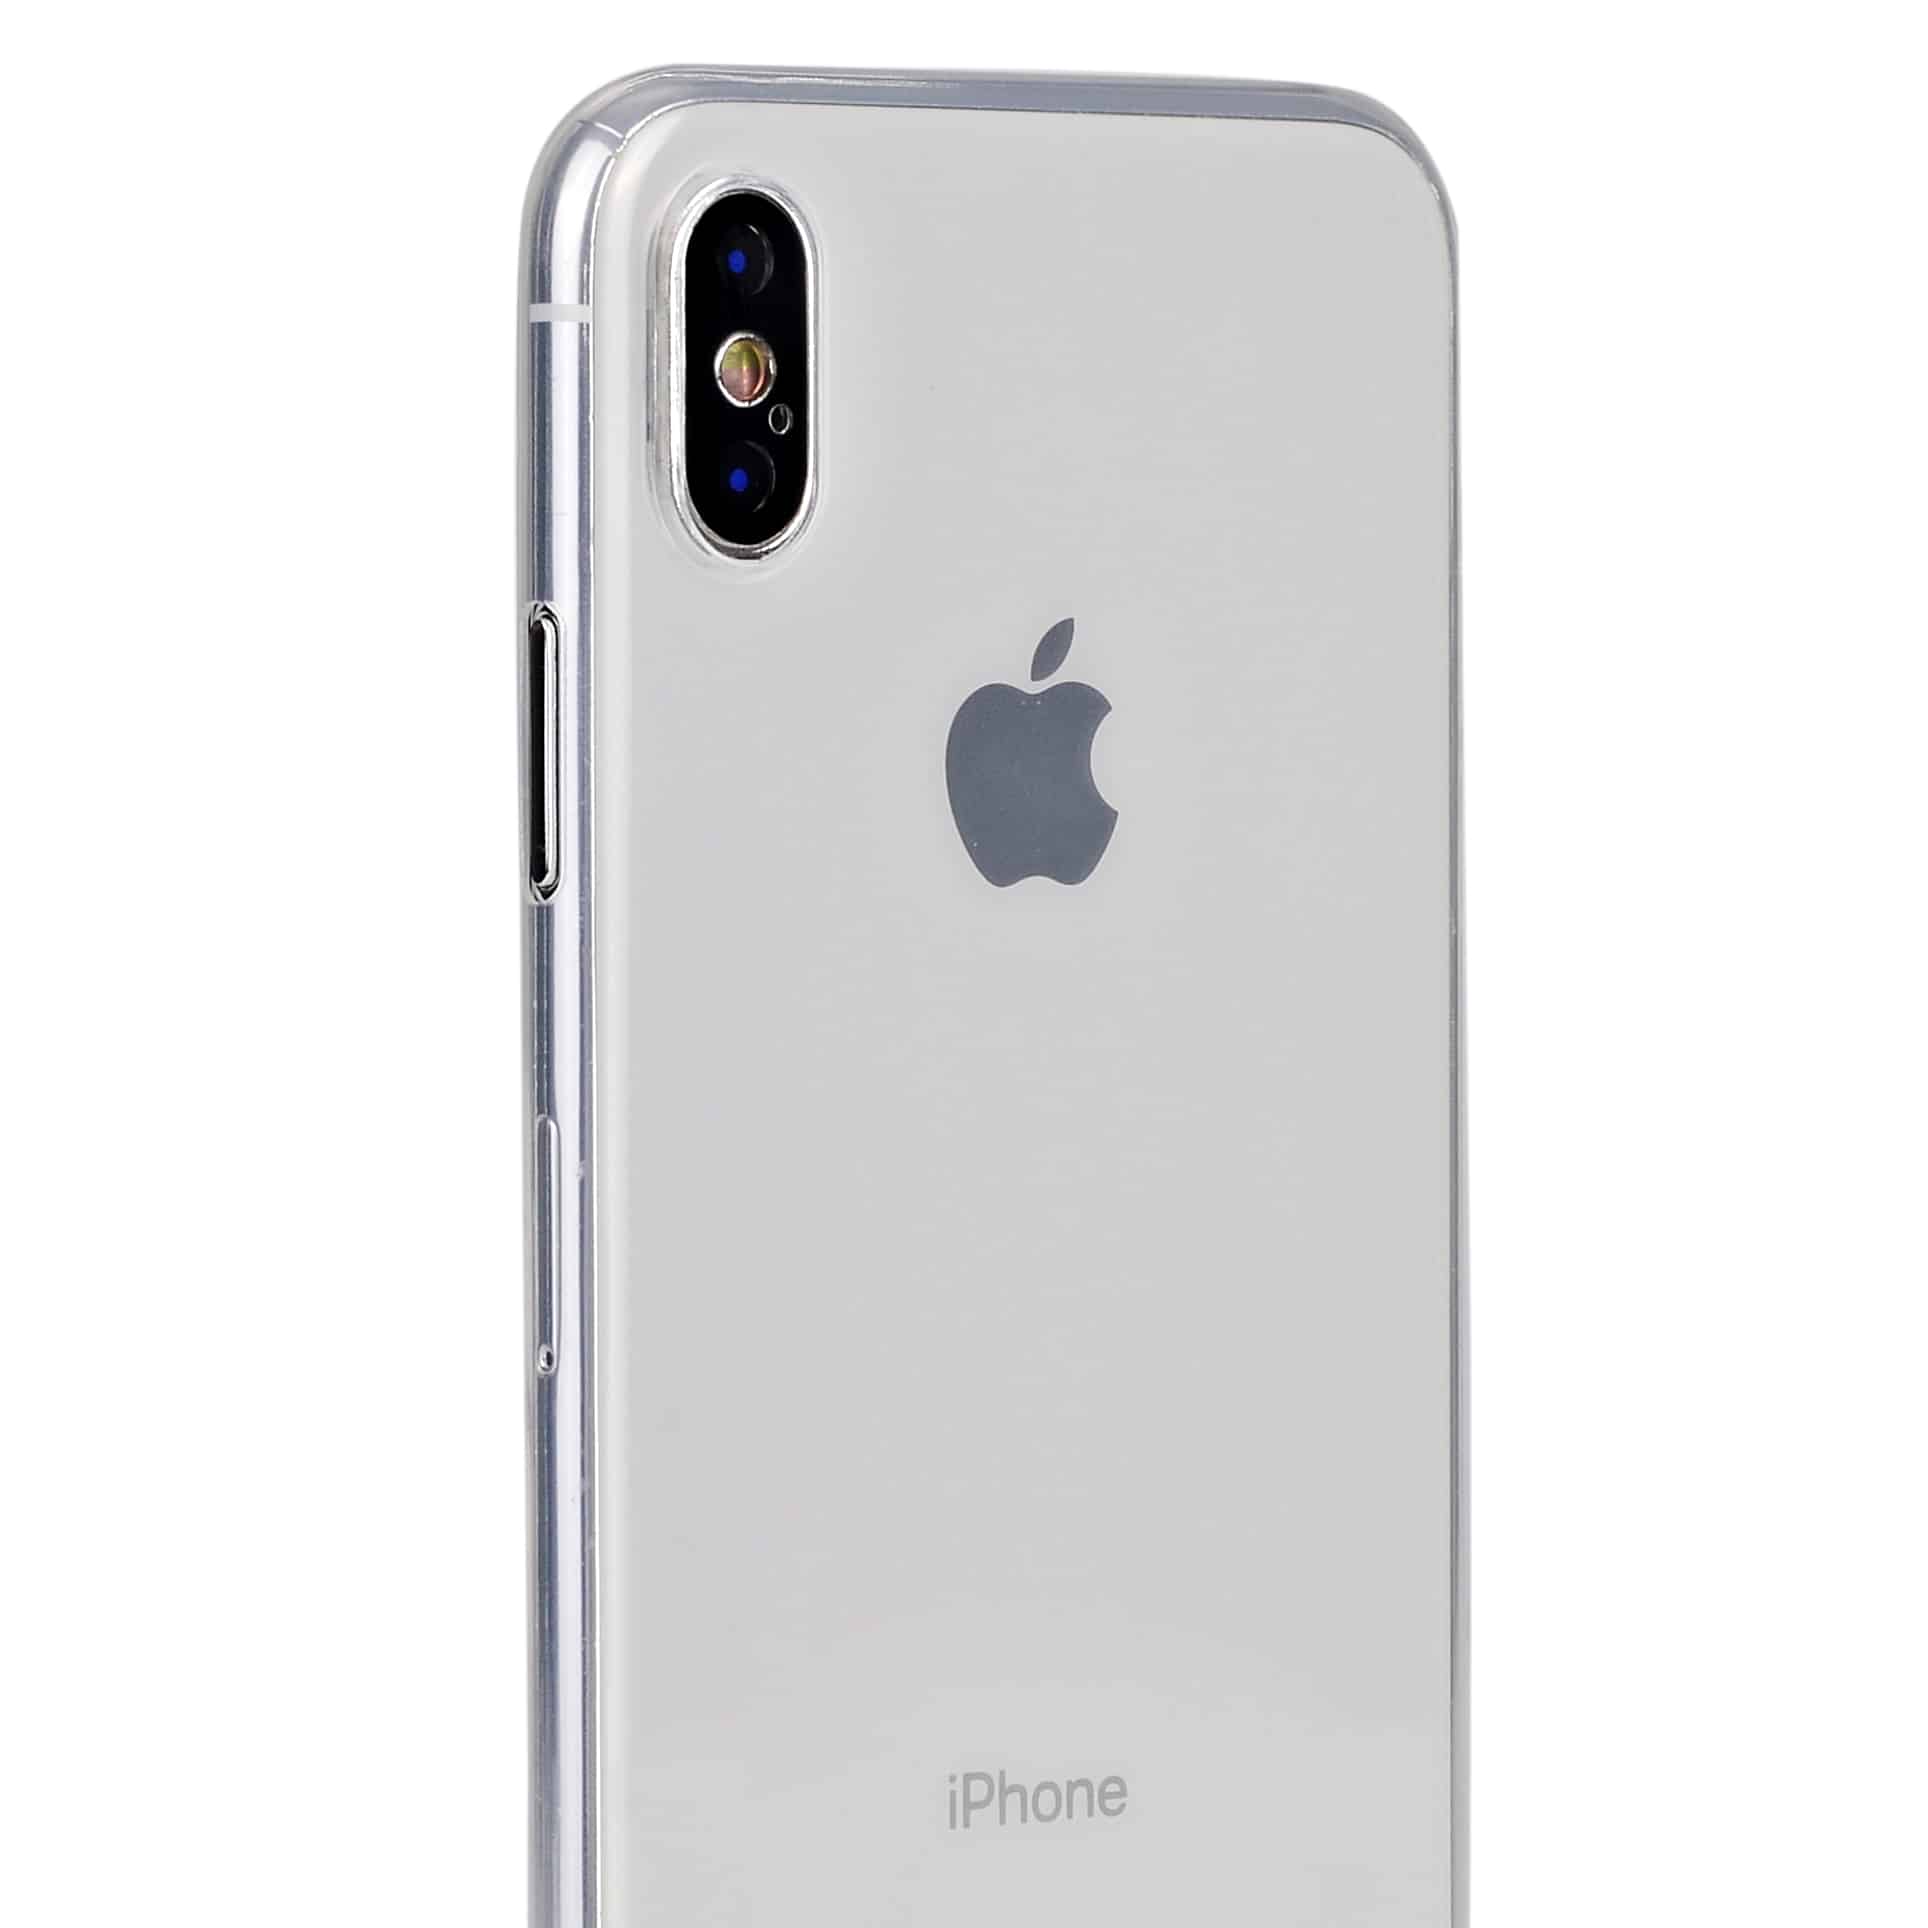 Unlike standard TPU cases, the MNML iPhone X case stays completely transparent.